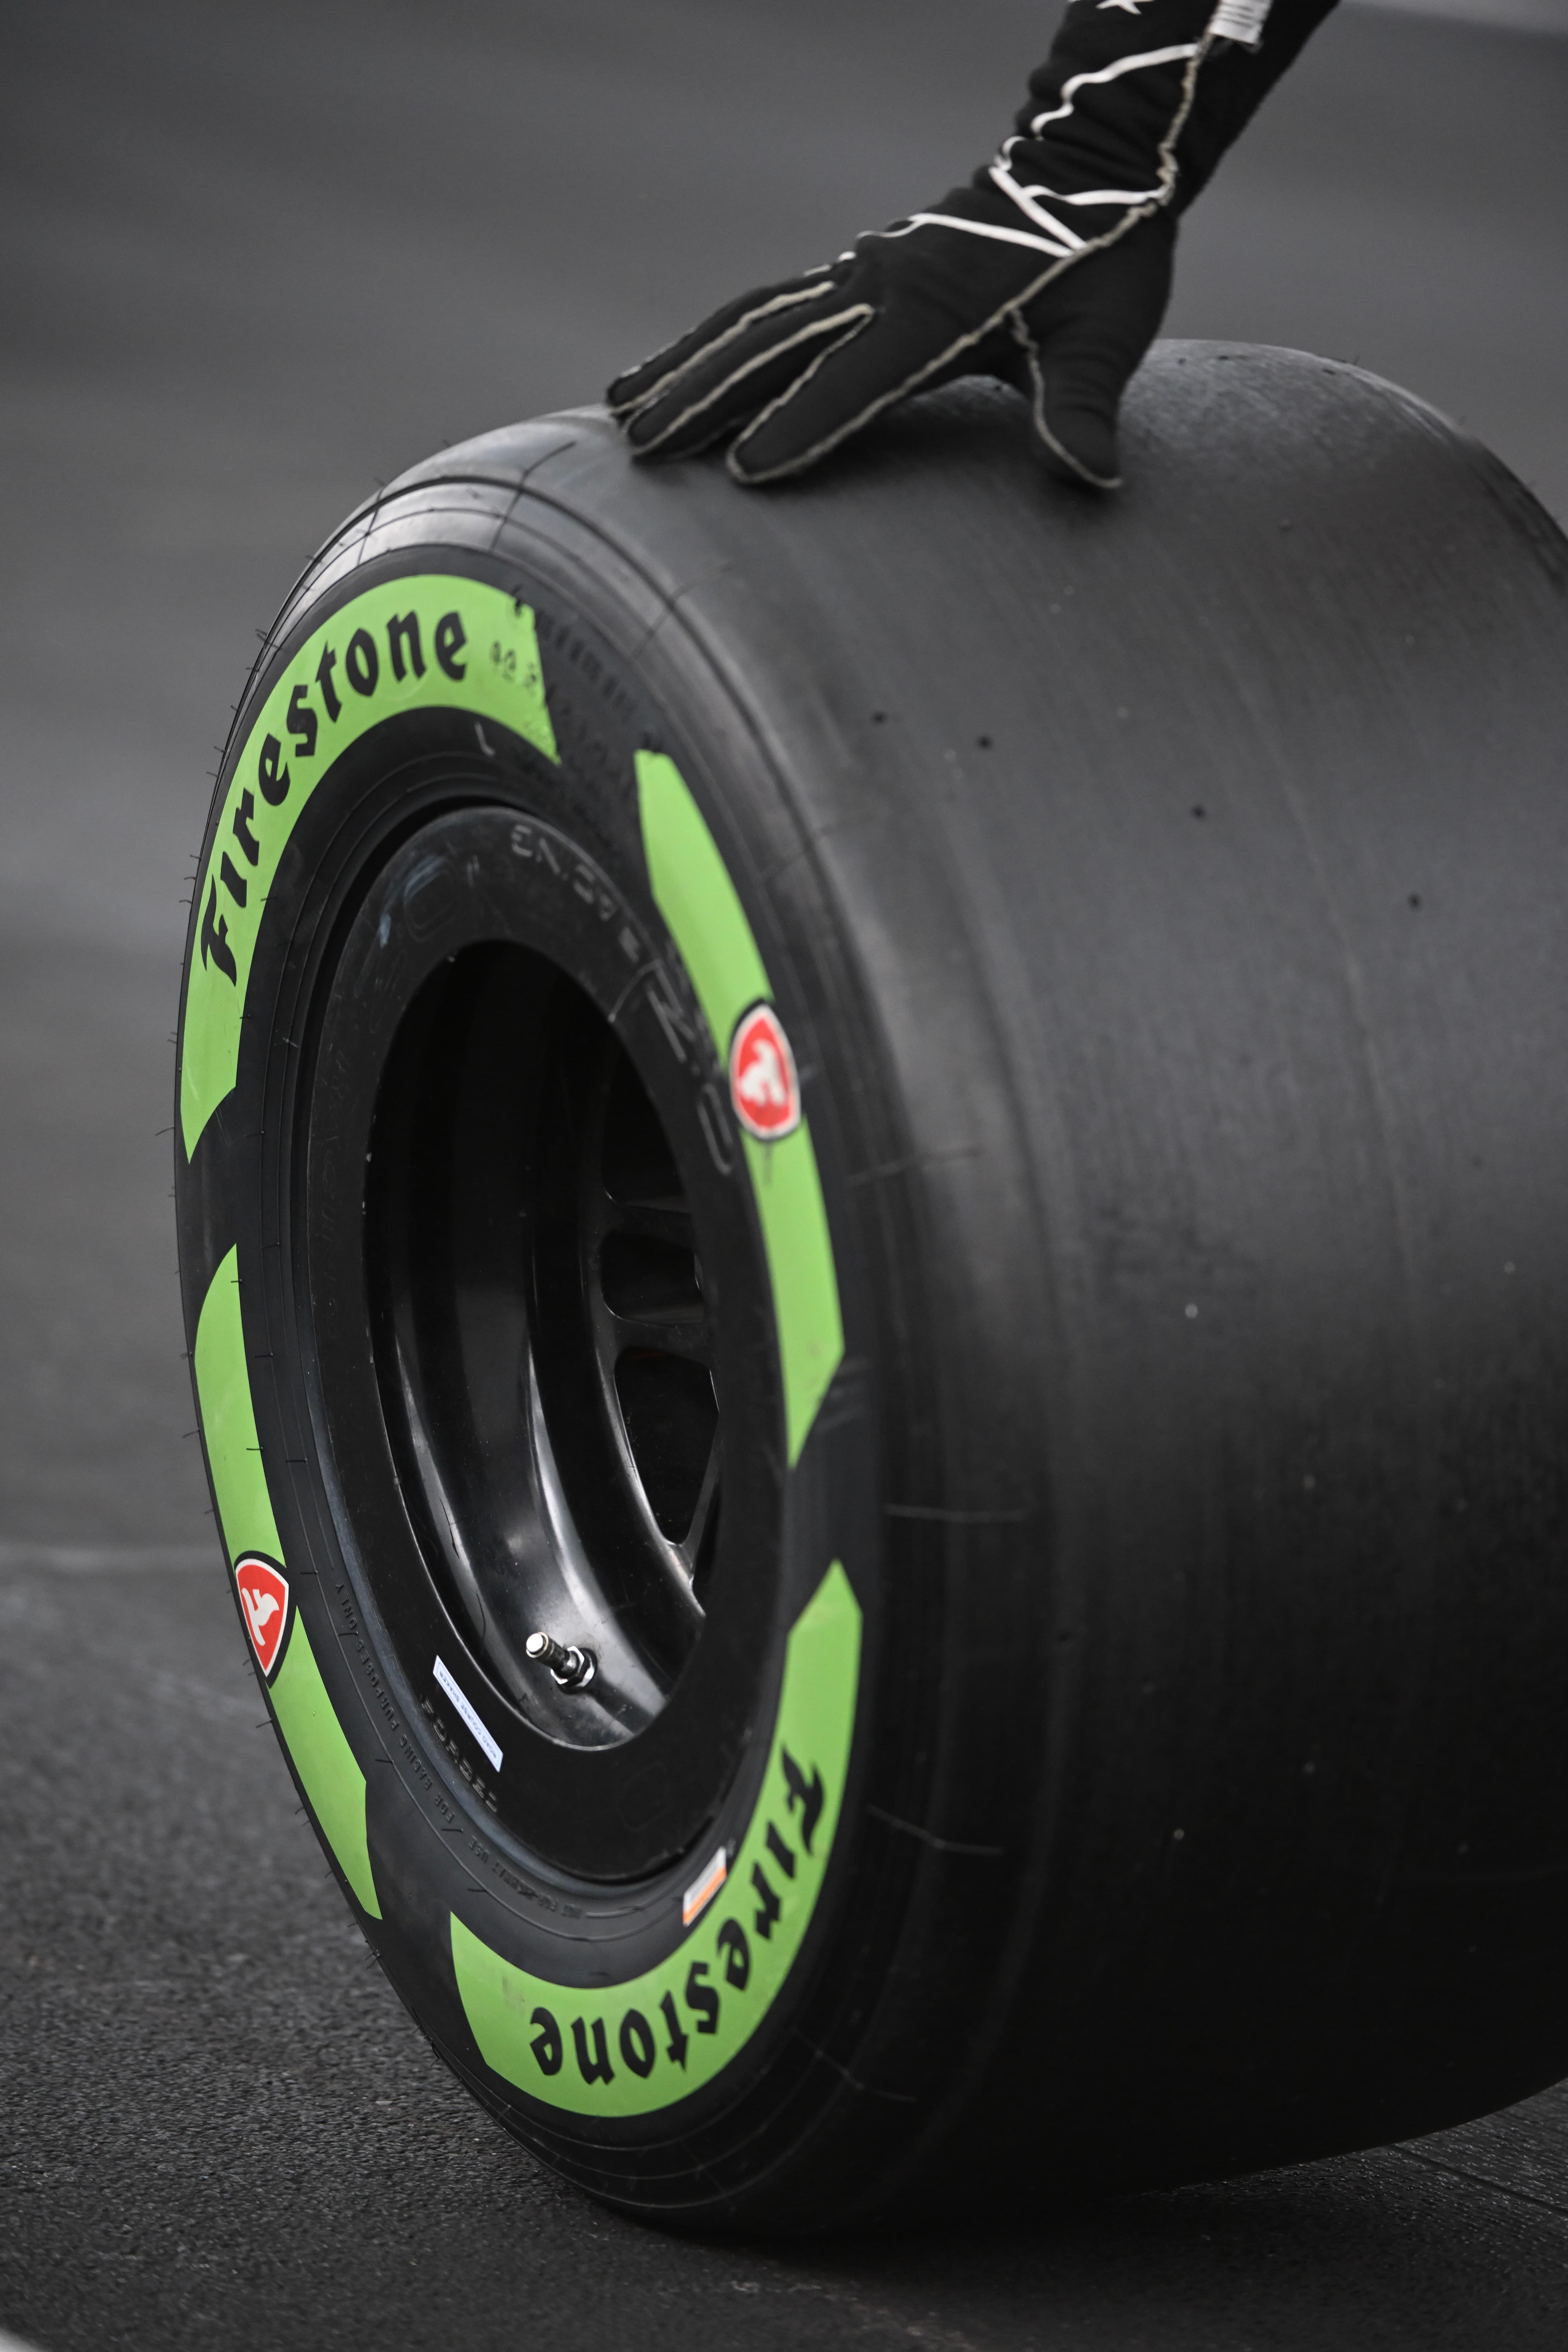 3 Firestone Tires used for Gallagher Grand Prix